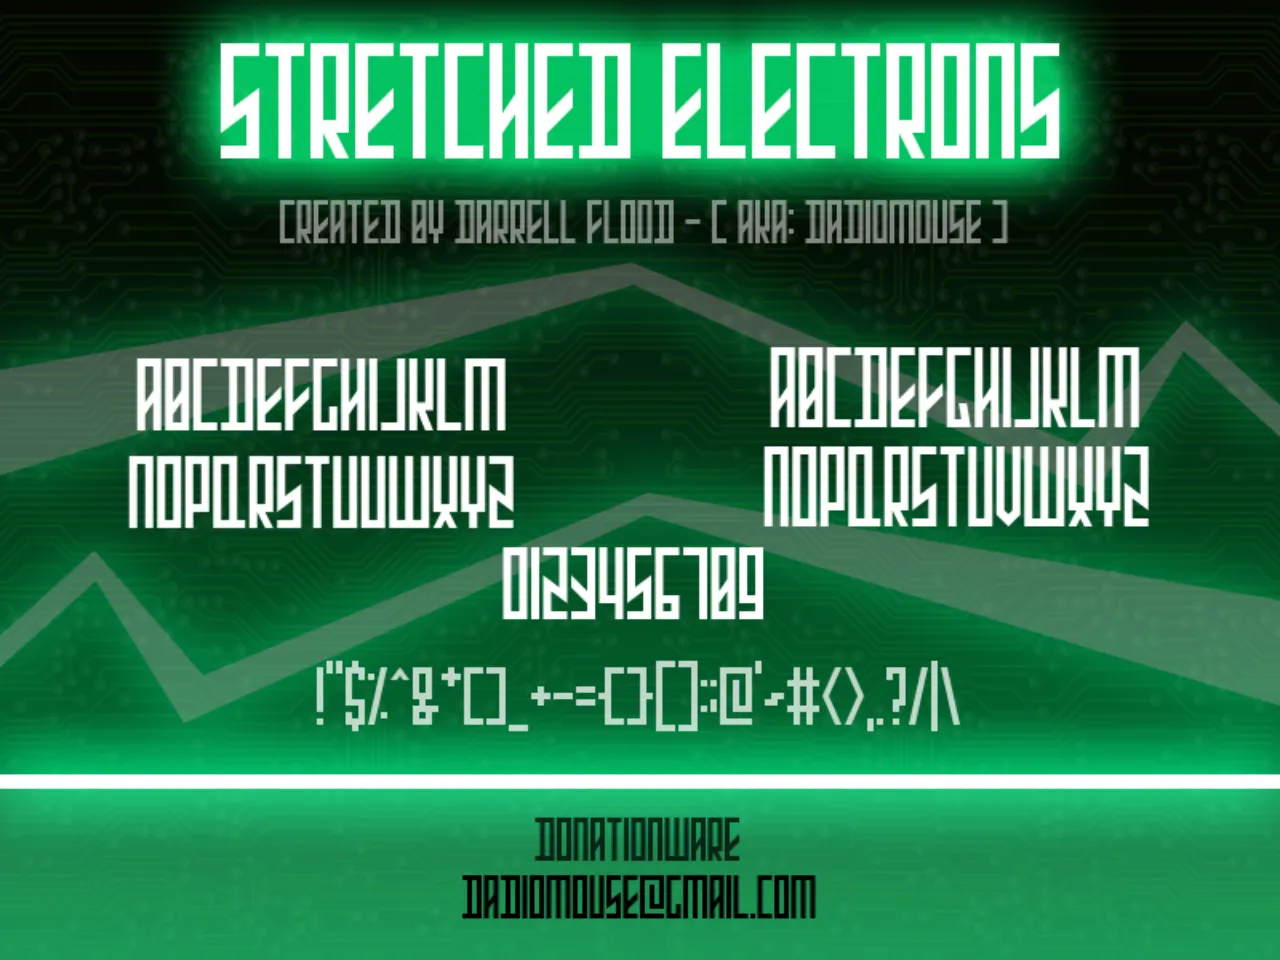 Font Logo Esport Stretched Electrons